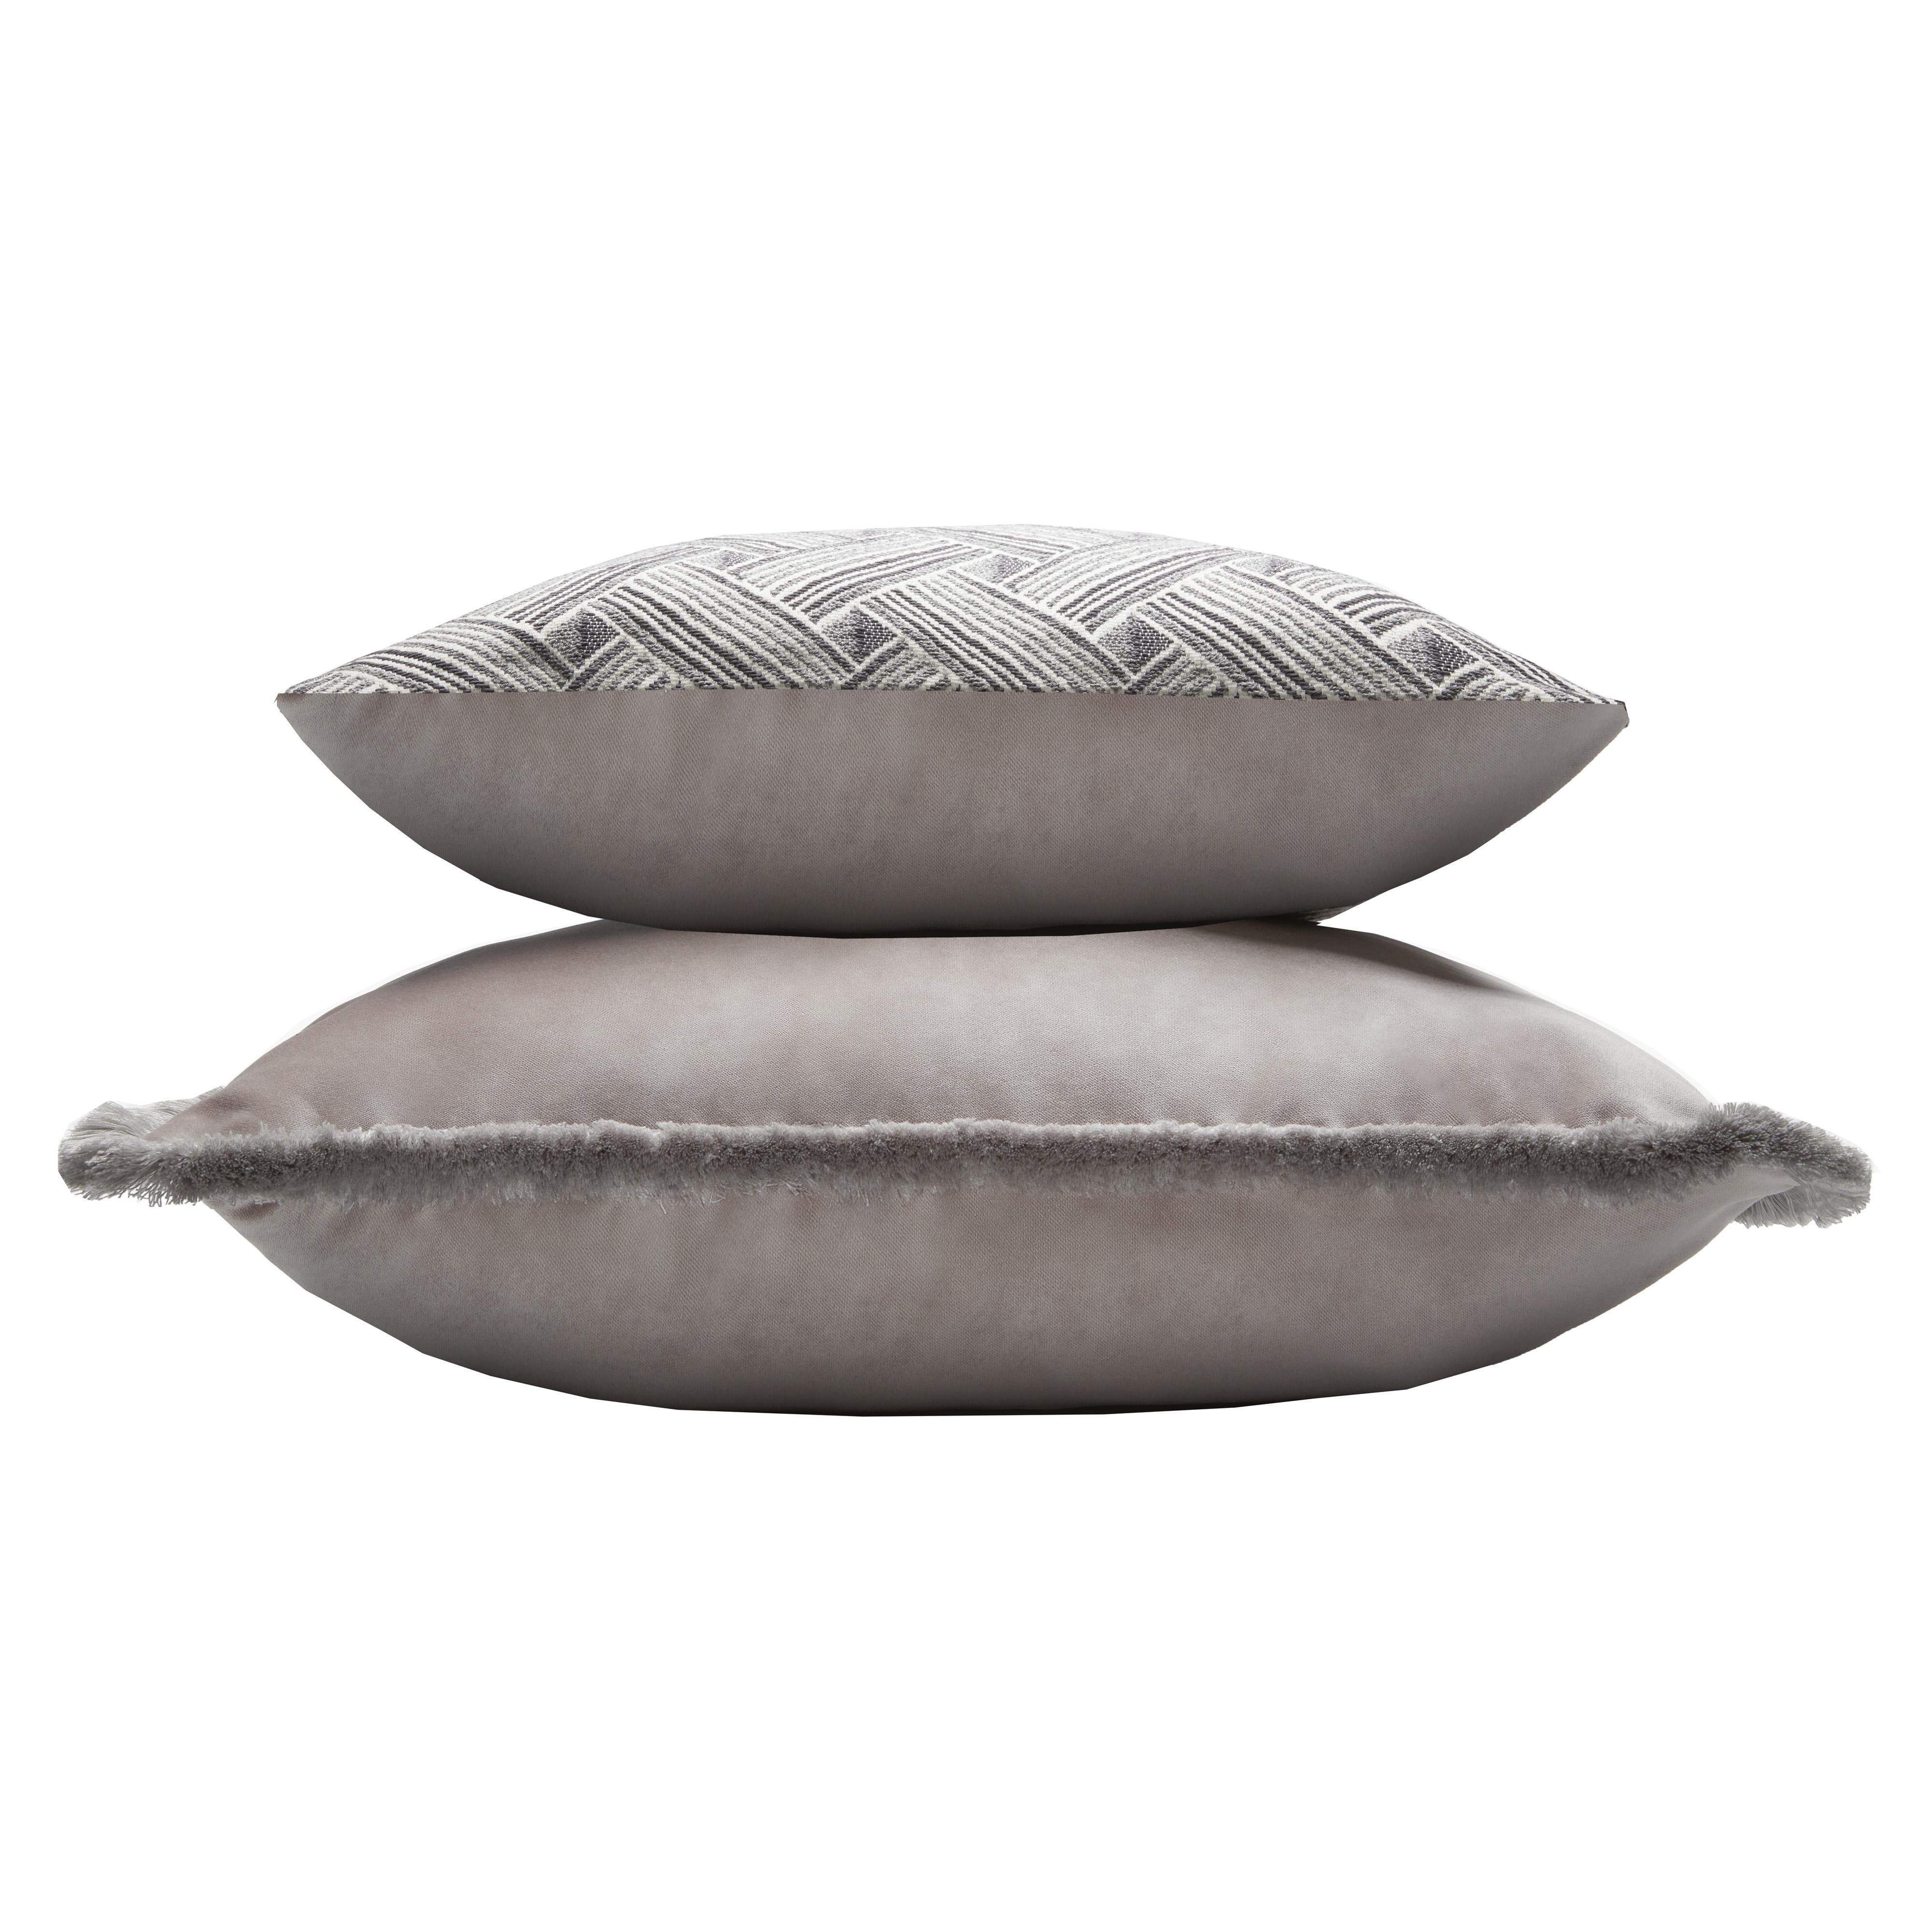 With double soft padding the Major Collection is
a stunning addition to a luxury classic or
contemporary interior and a perfect piece to pair
with the other cushions of LO Décor ROCK
Collection for a contrasting design effect.
Carefully